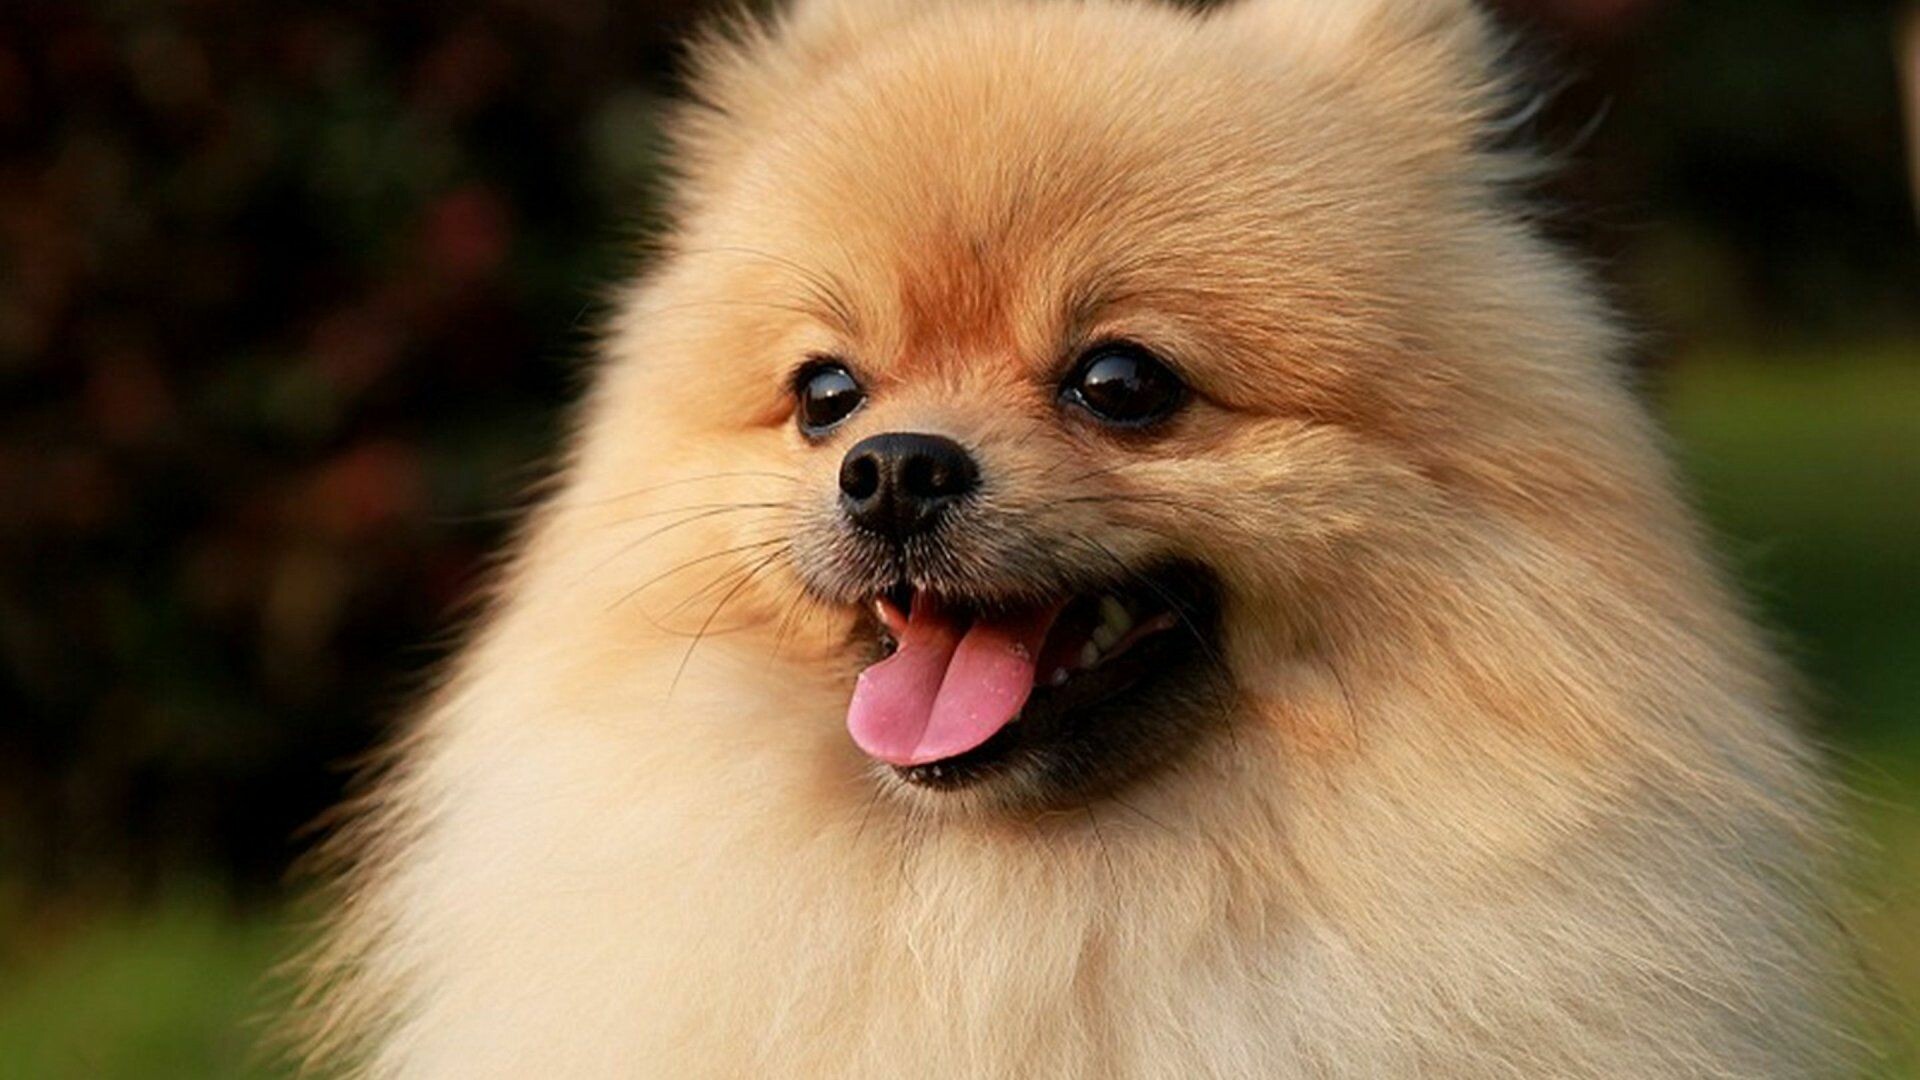 Pomeranian: Spitz, A compactly built dog with a foxlike head and small erect ears. 1920x1080 Full HD Background.